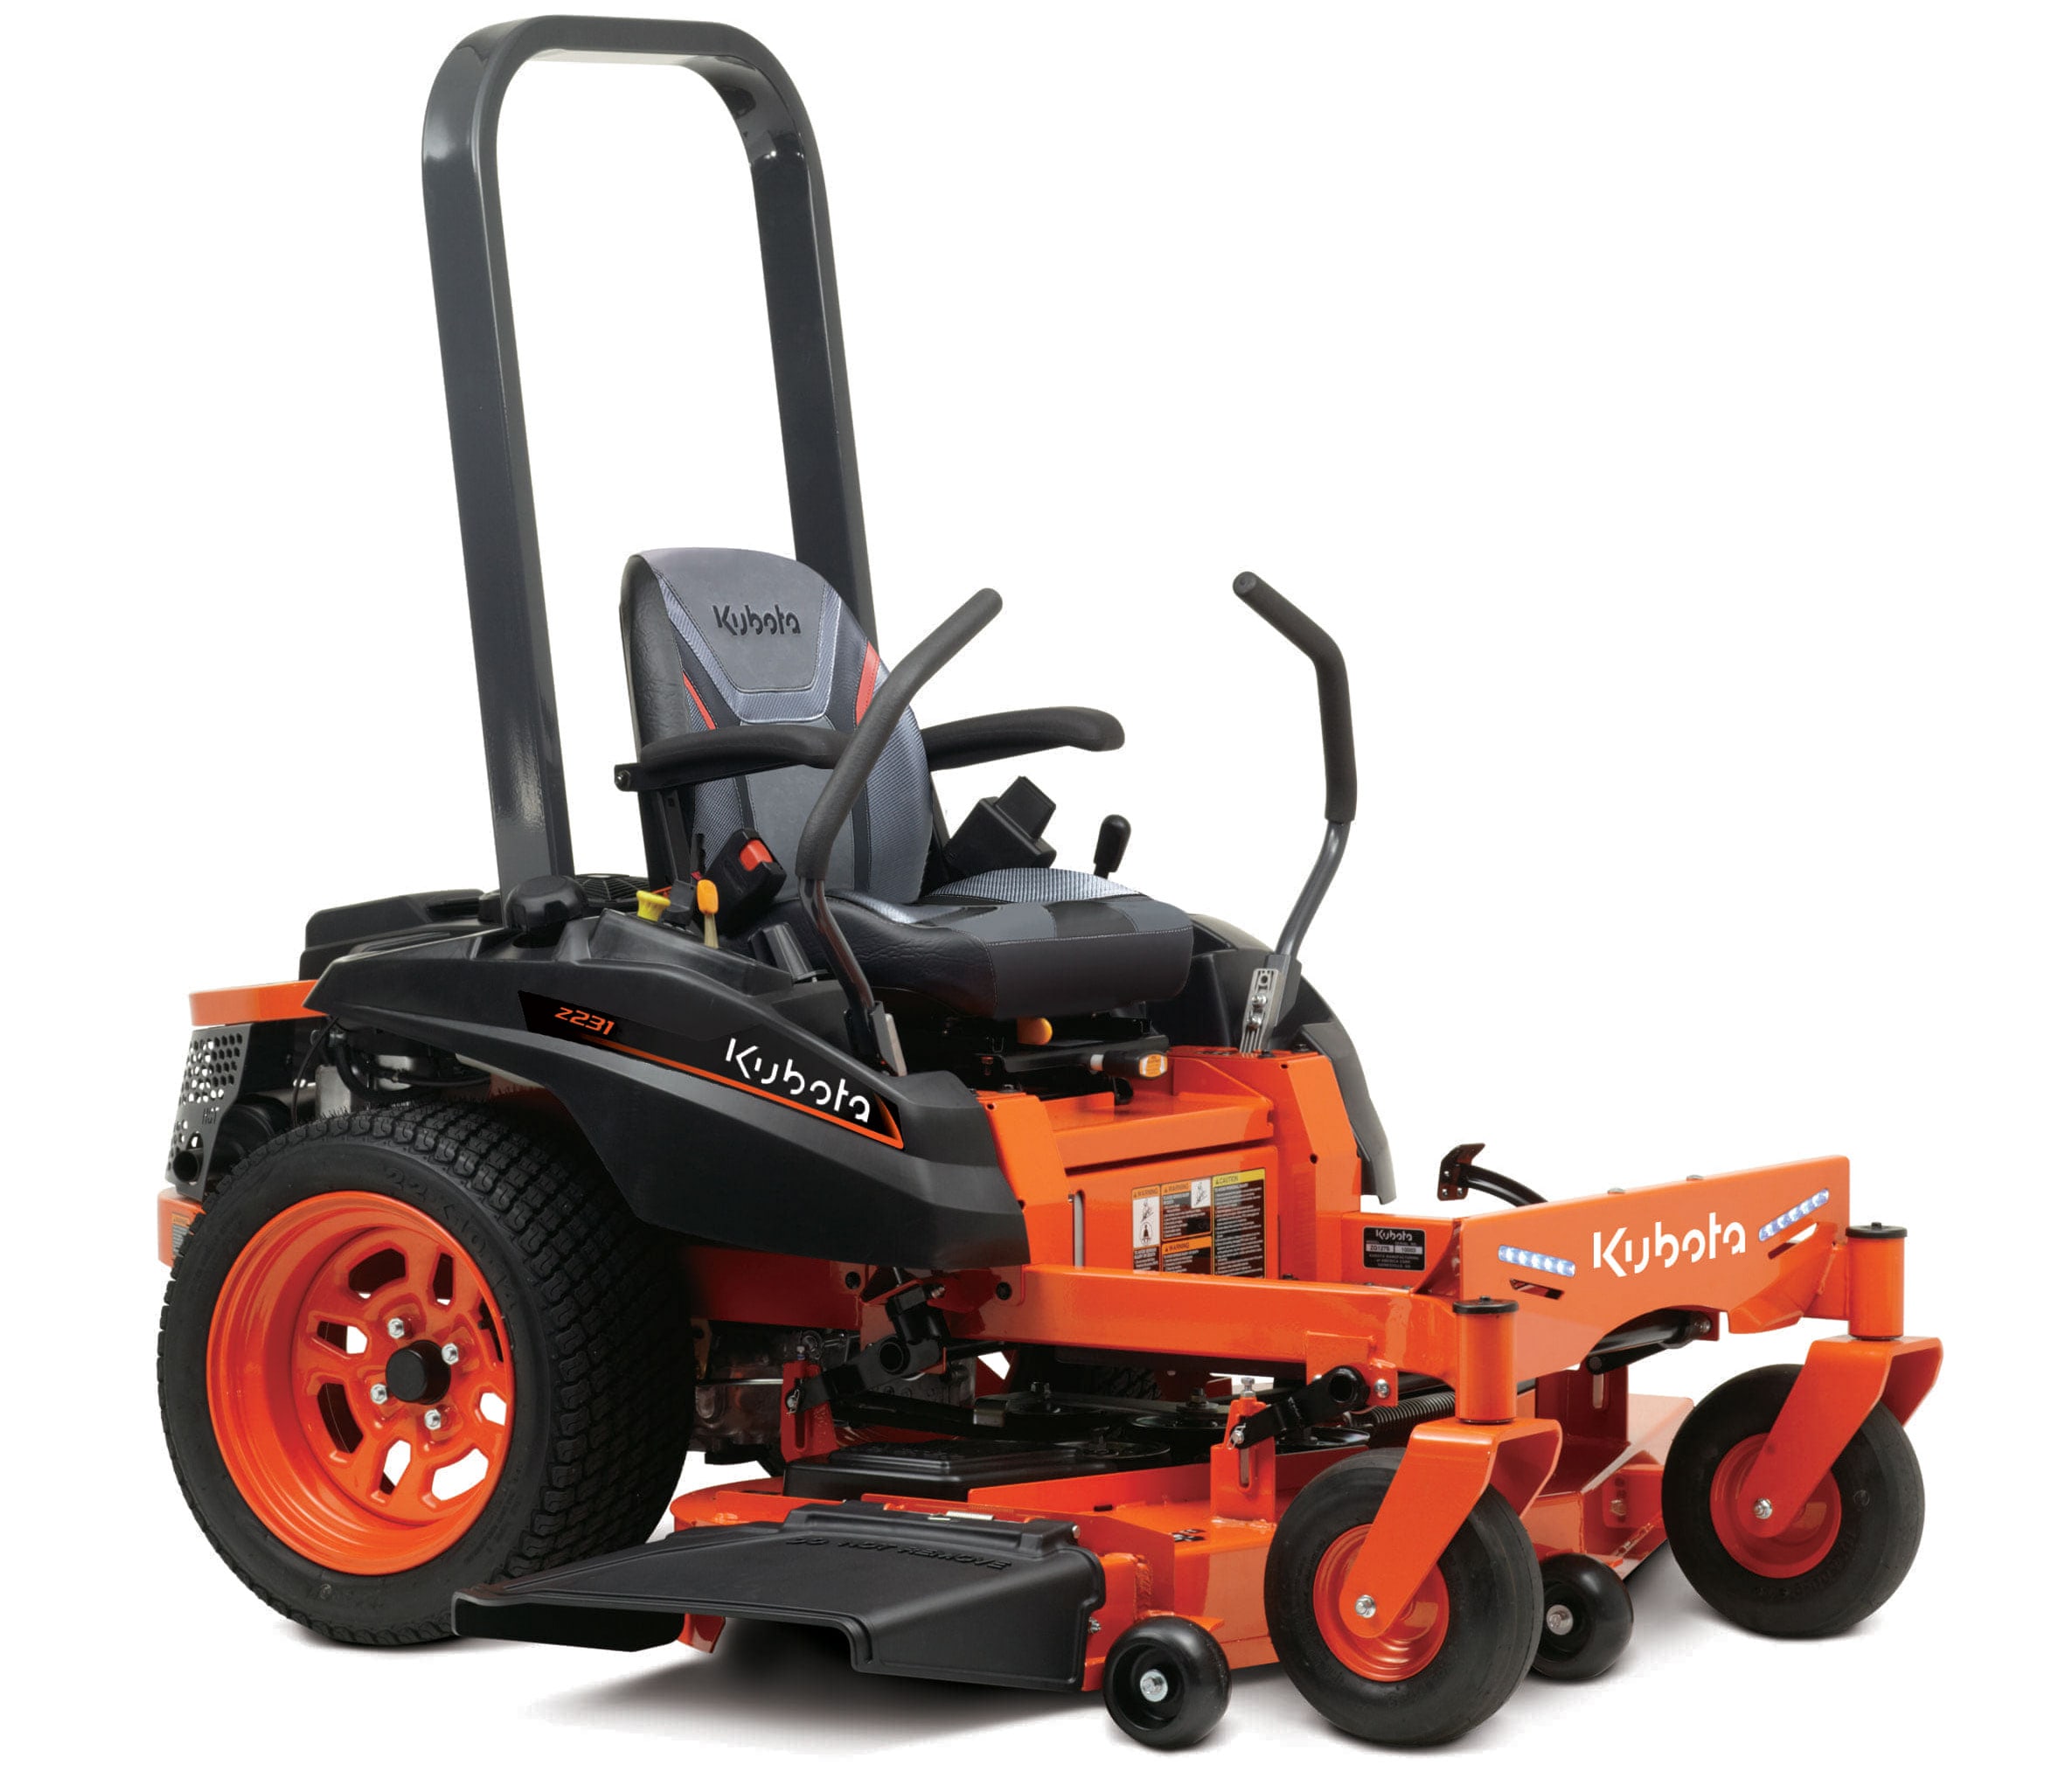 Z200 SERIES MOWERS - Offer Photo